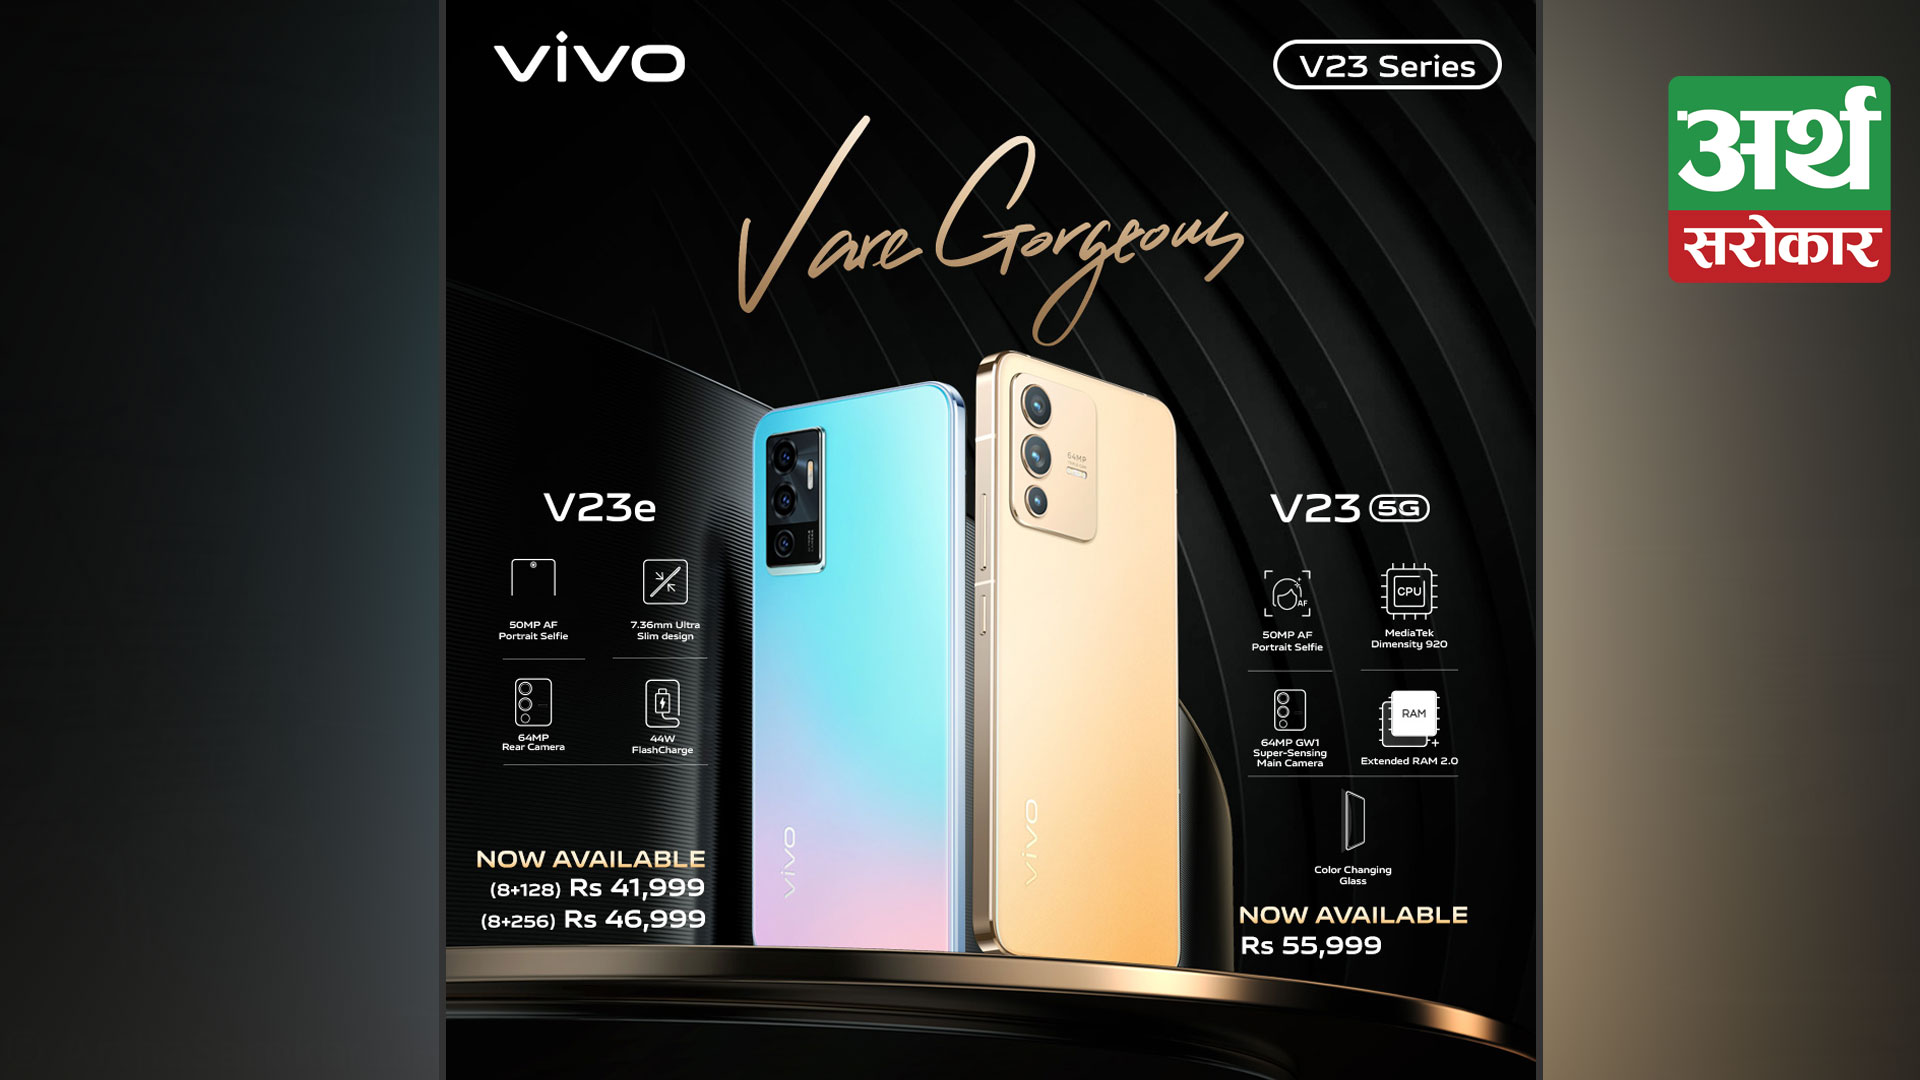 Powerful, Stylish, Innovative: vivo’s V23 Series Is Here To Provide Edge To Your Personal Style In 2022